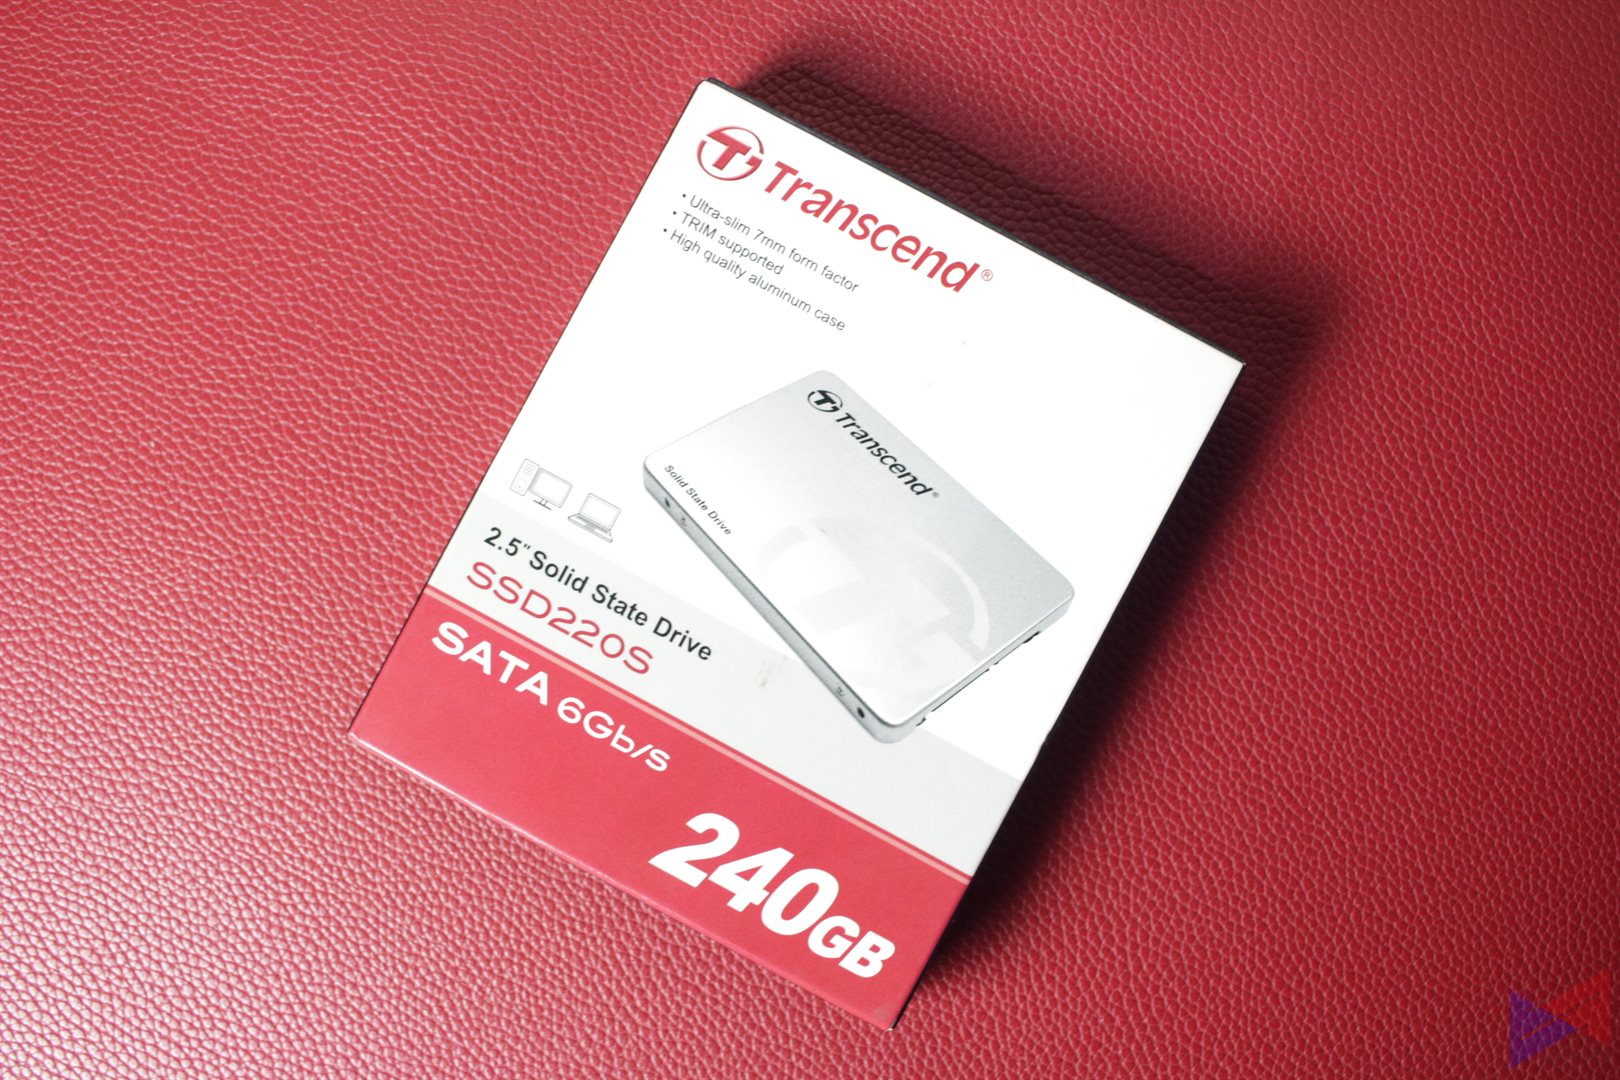 Transcend SSD220S SATA 6Gb/s 2.5″ 240GB Solid State Drive Review